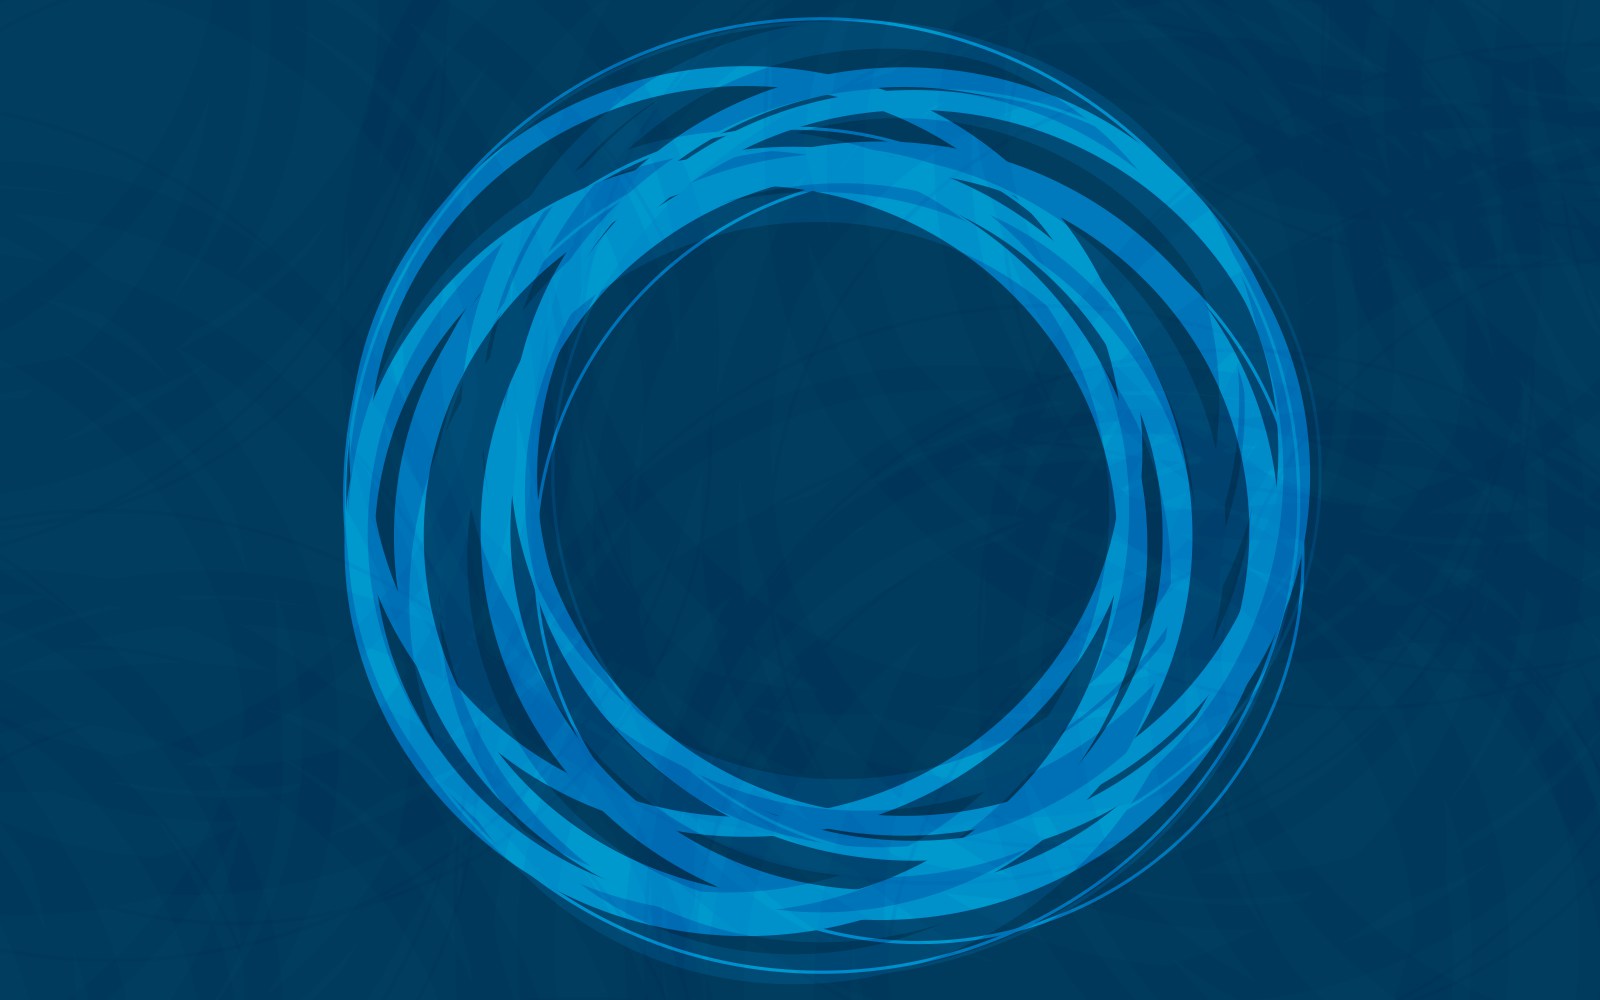 A circle made of many blue rings on a blue backgorund.